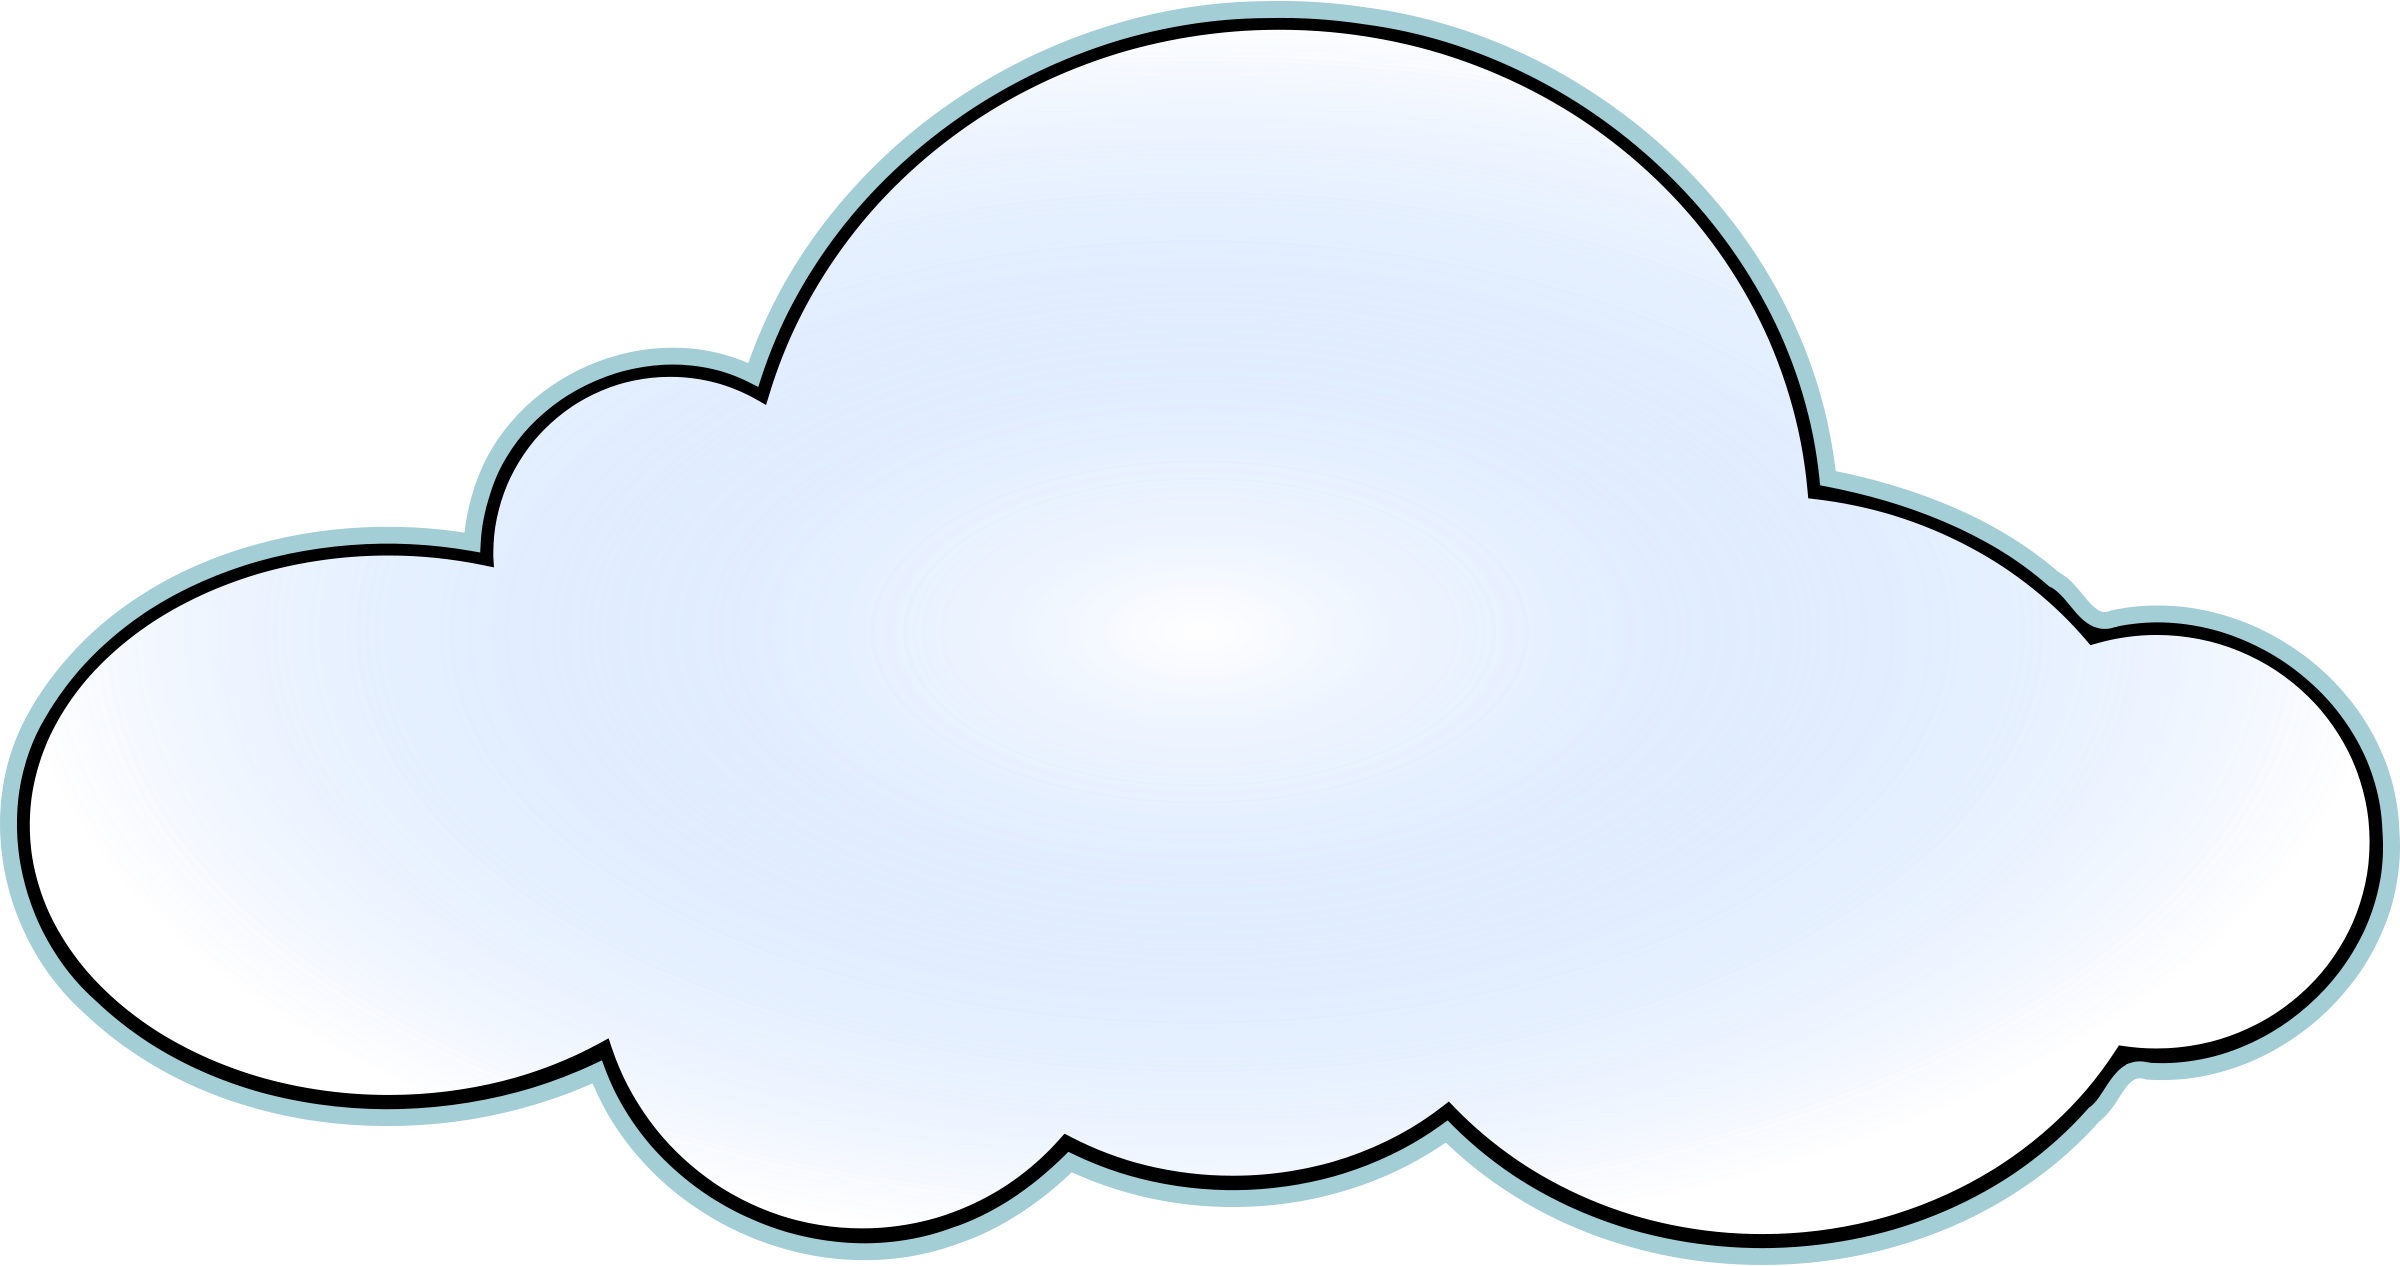 Cloud clip art black and white free clipart images